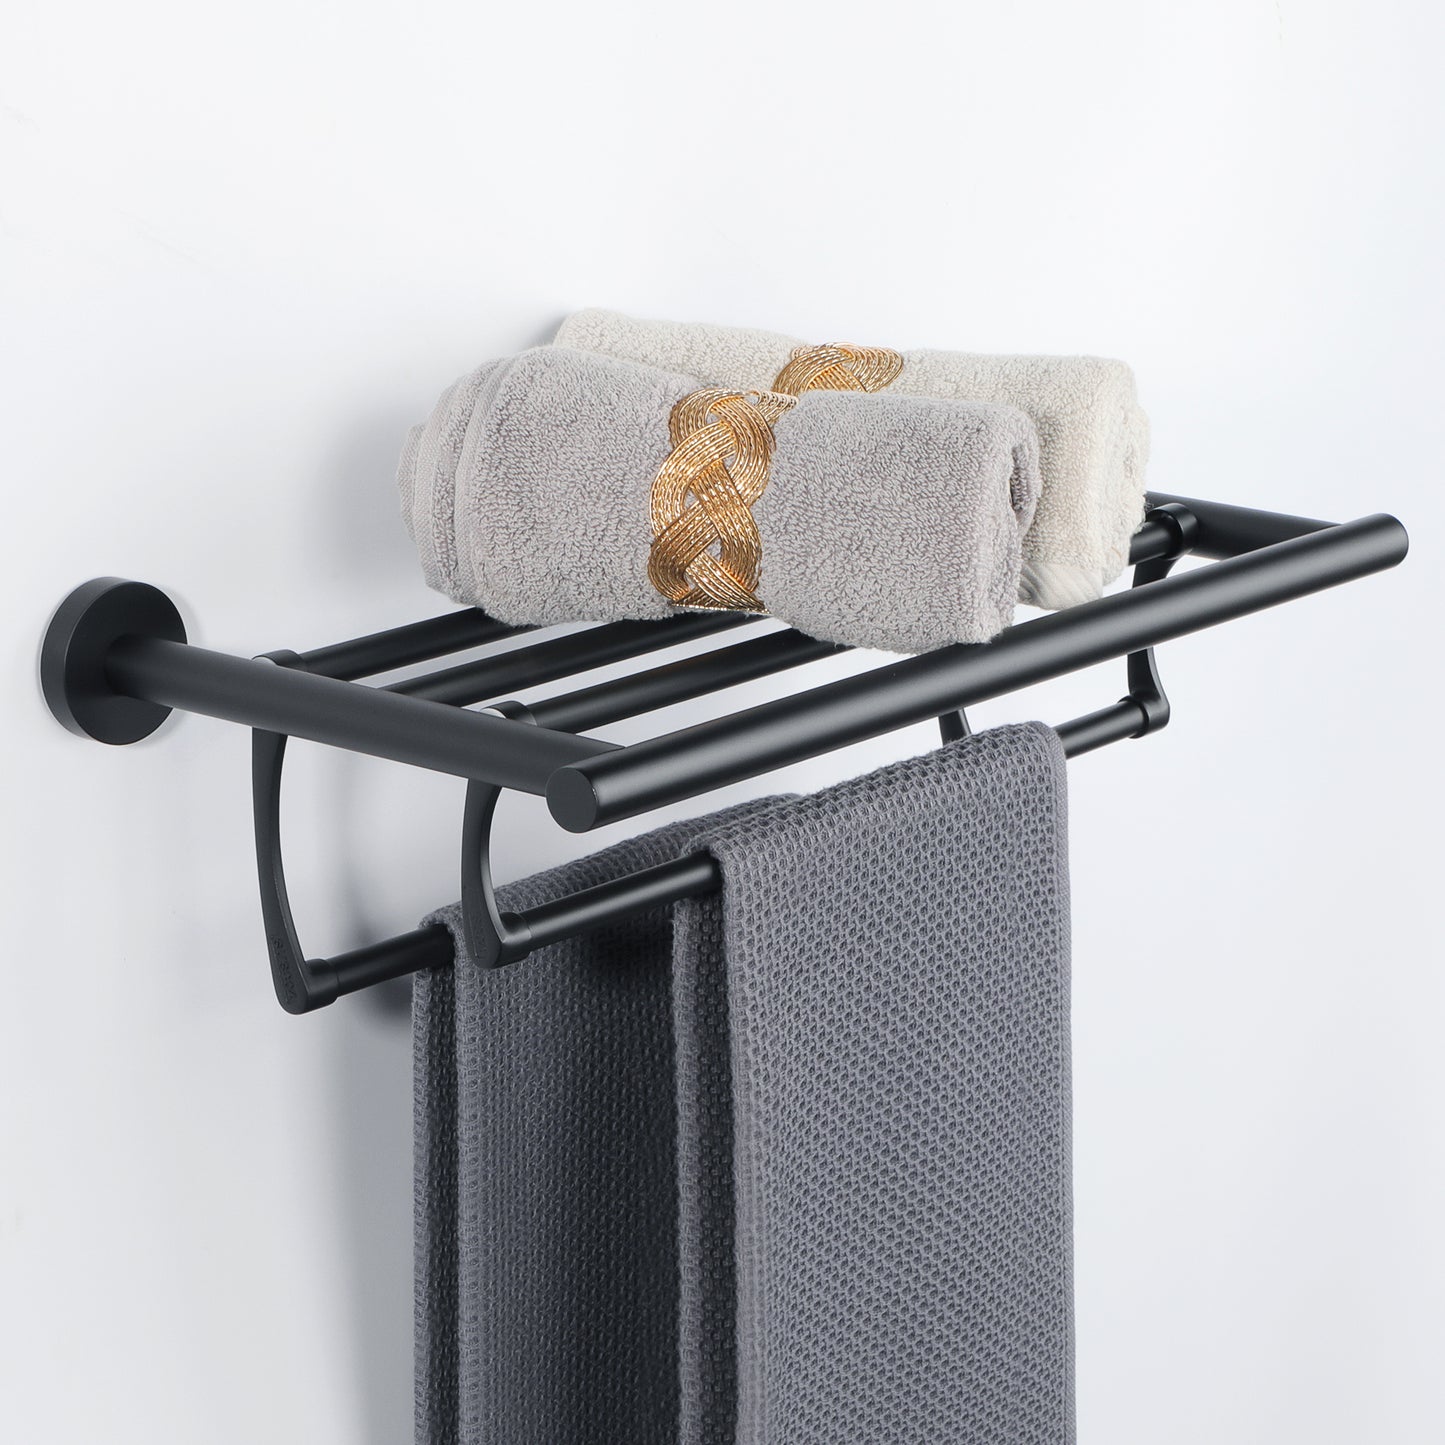 Sayayo Stainless Steel Towel Rack (with Double Foldable Hanging Rail)